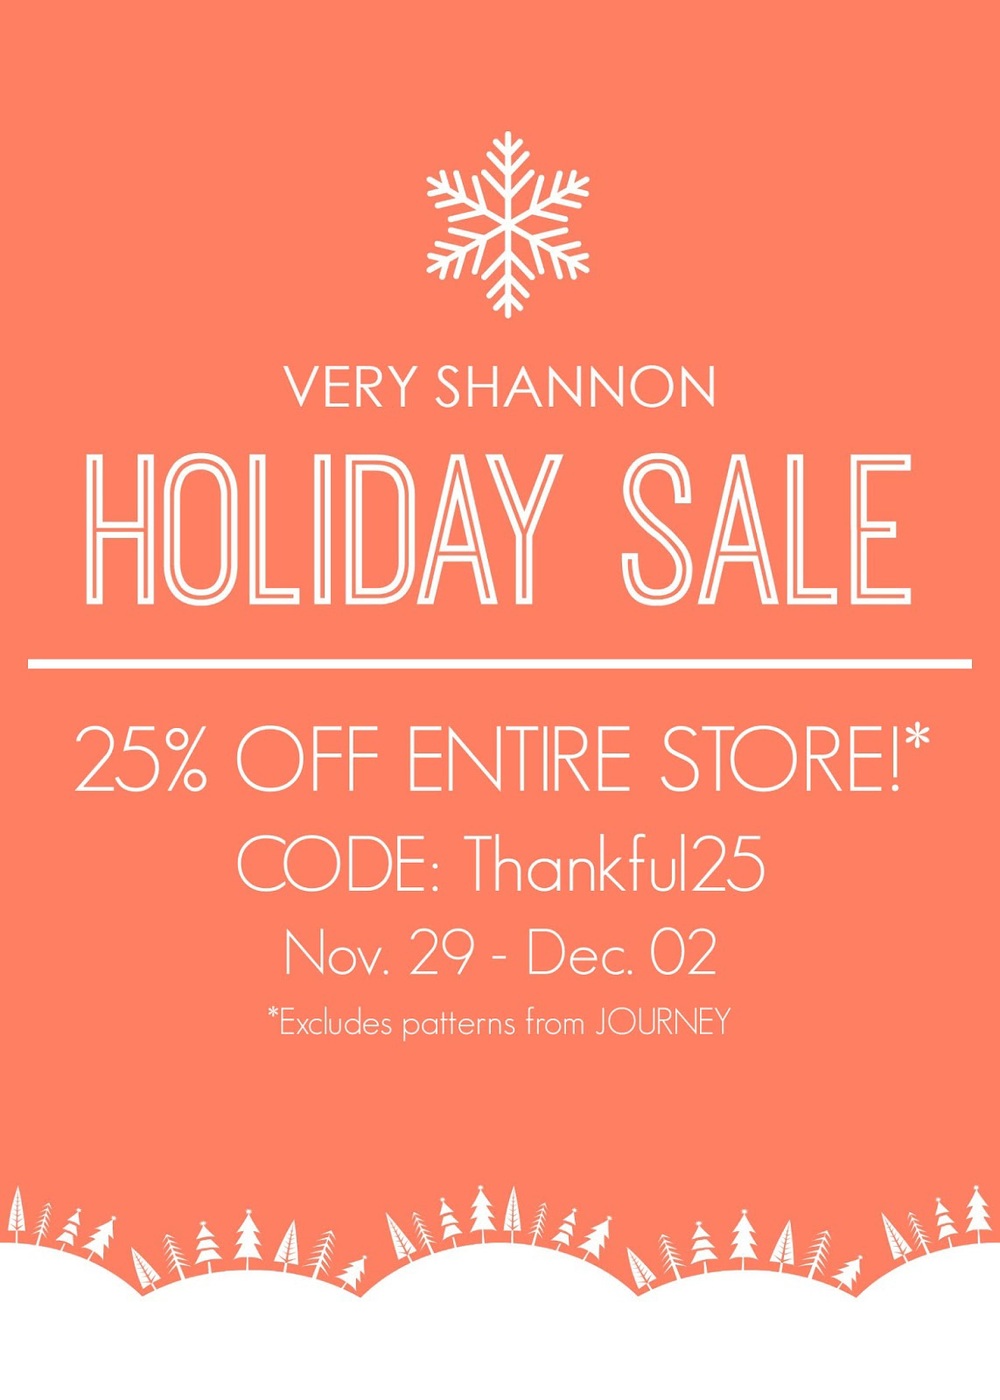 Very Shannon Holiday Sale || 25% off entire store!